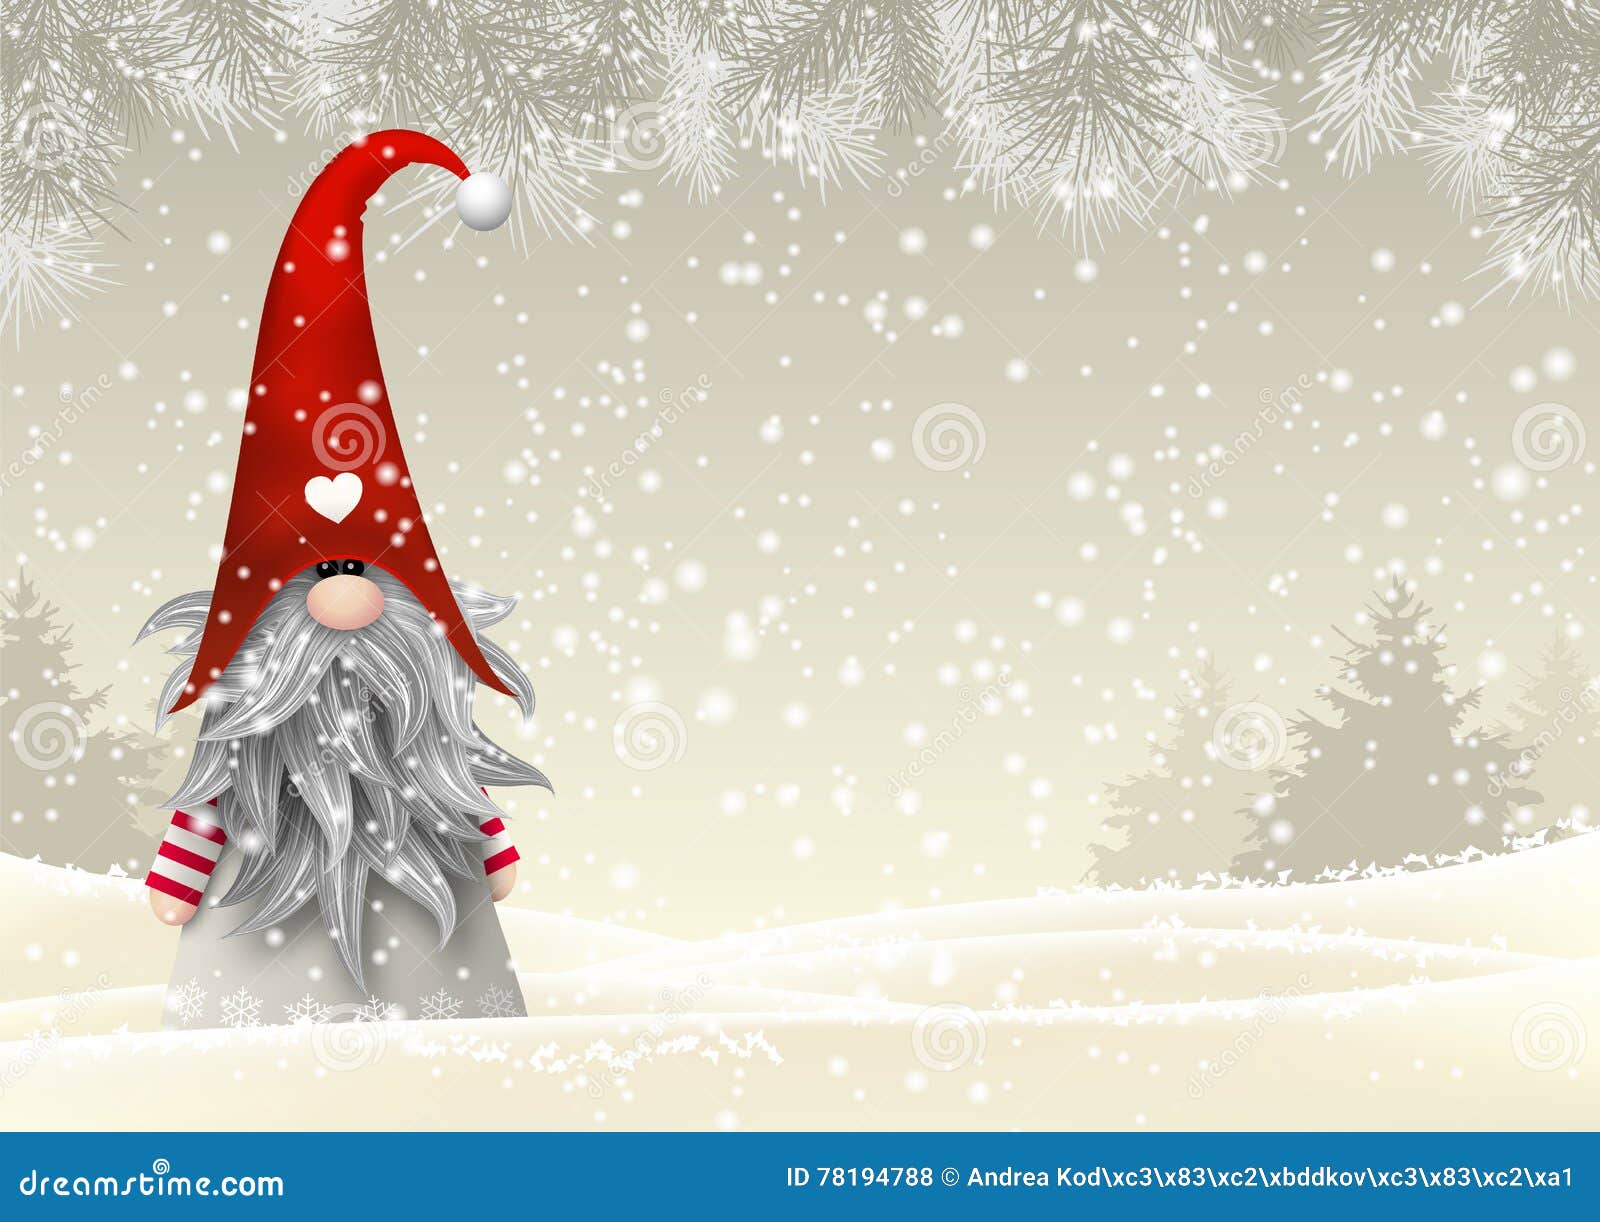 Download Christmas Gnome Stock Illustrations 5 488 Christmas Gnome Stock Illustrations Vectors Clipart Dreamstime